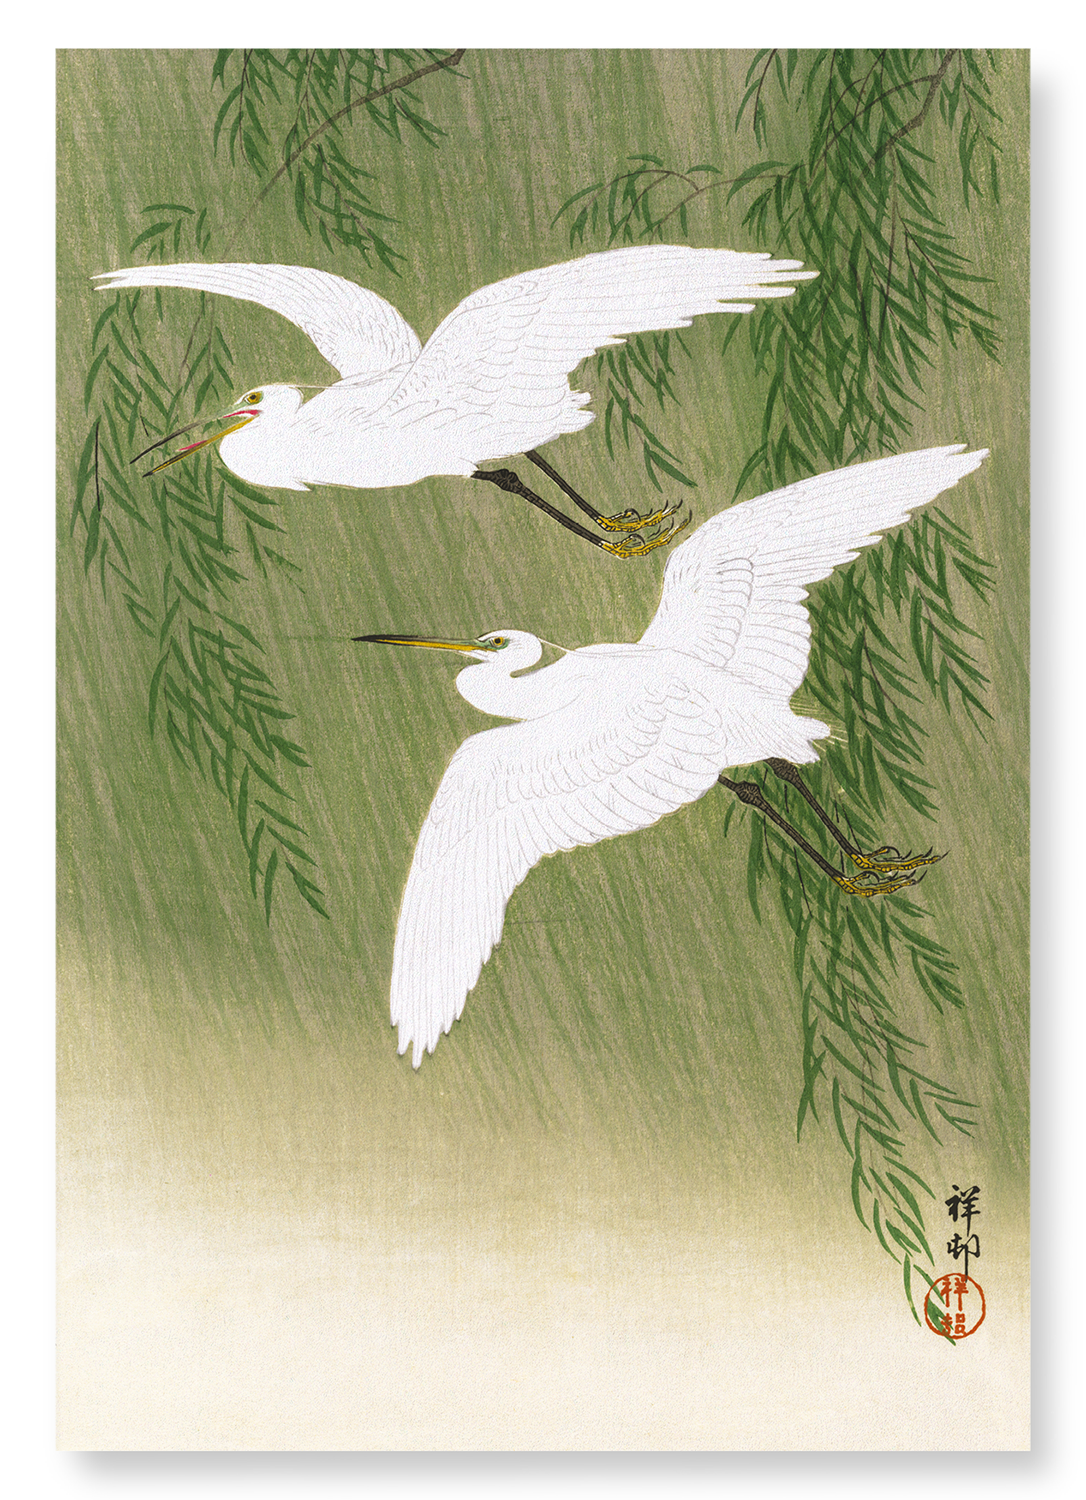 EGRETS AND WILLOW: Japanese Art Print